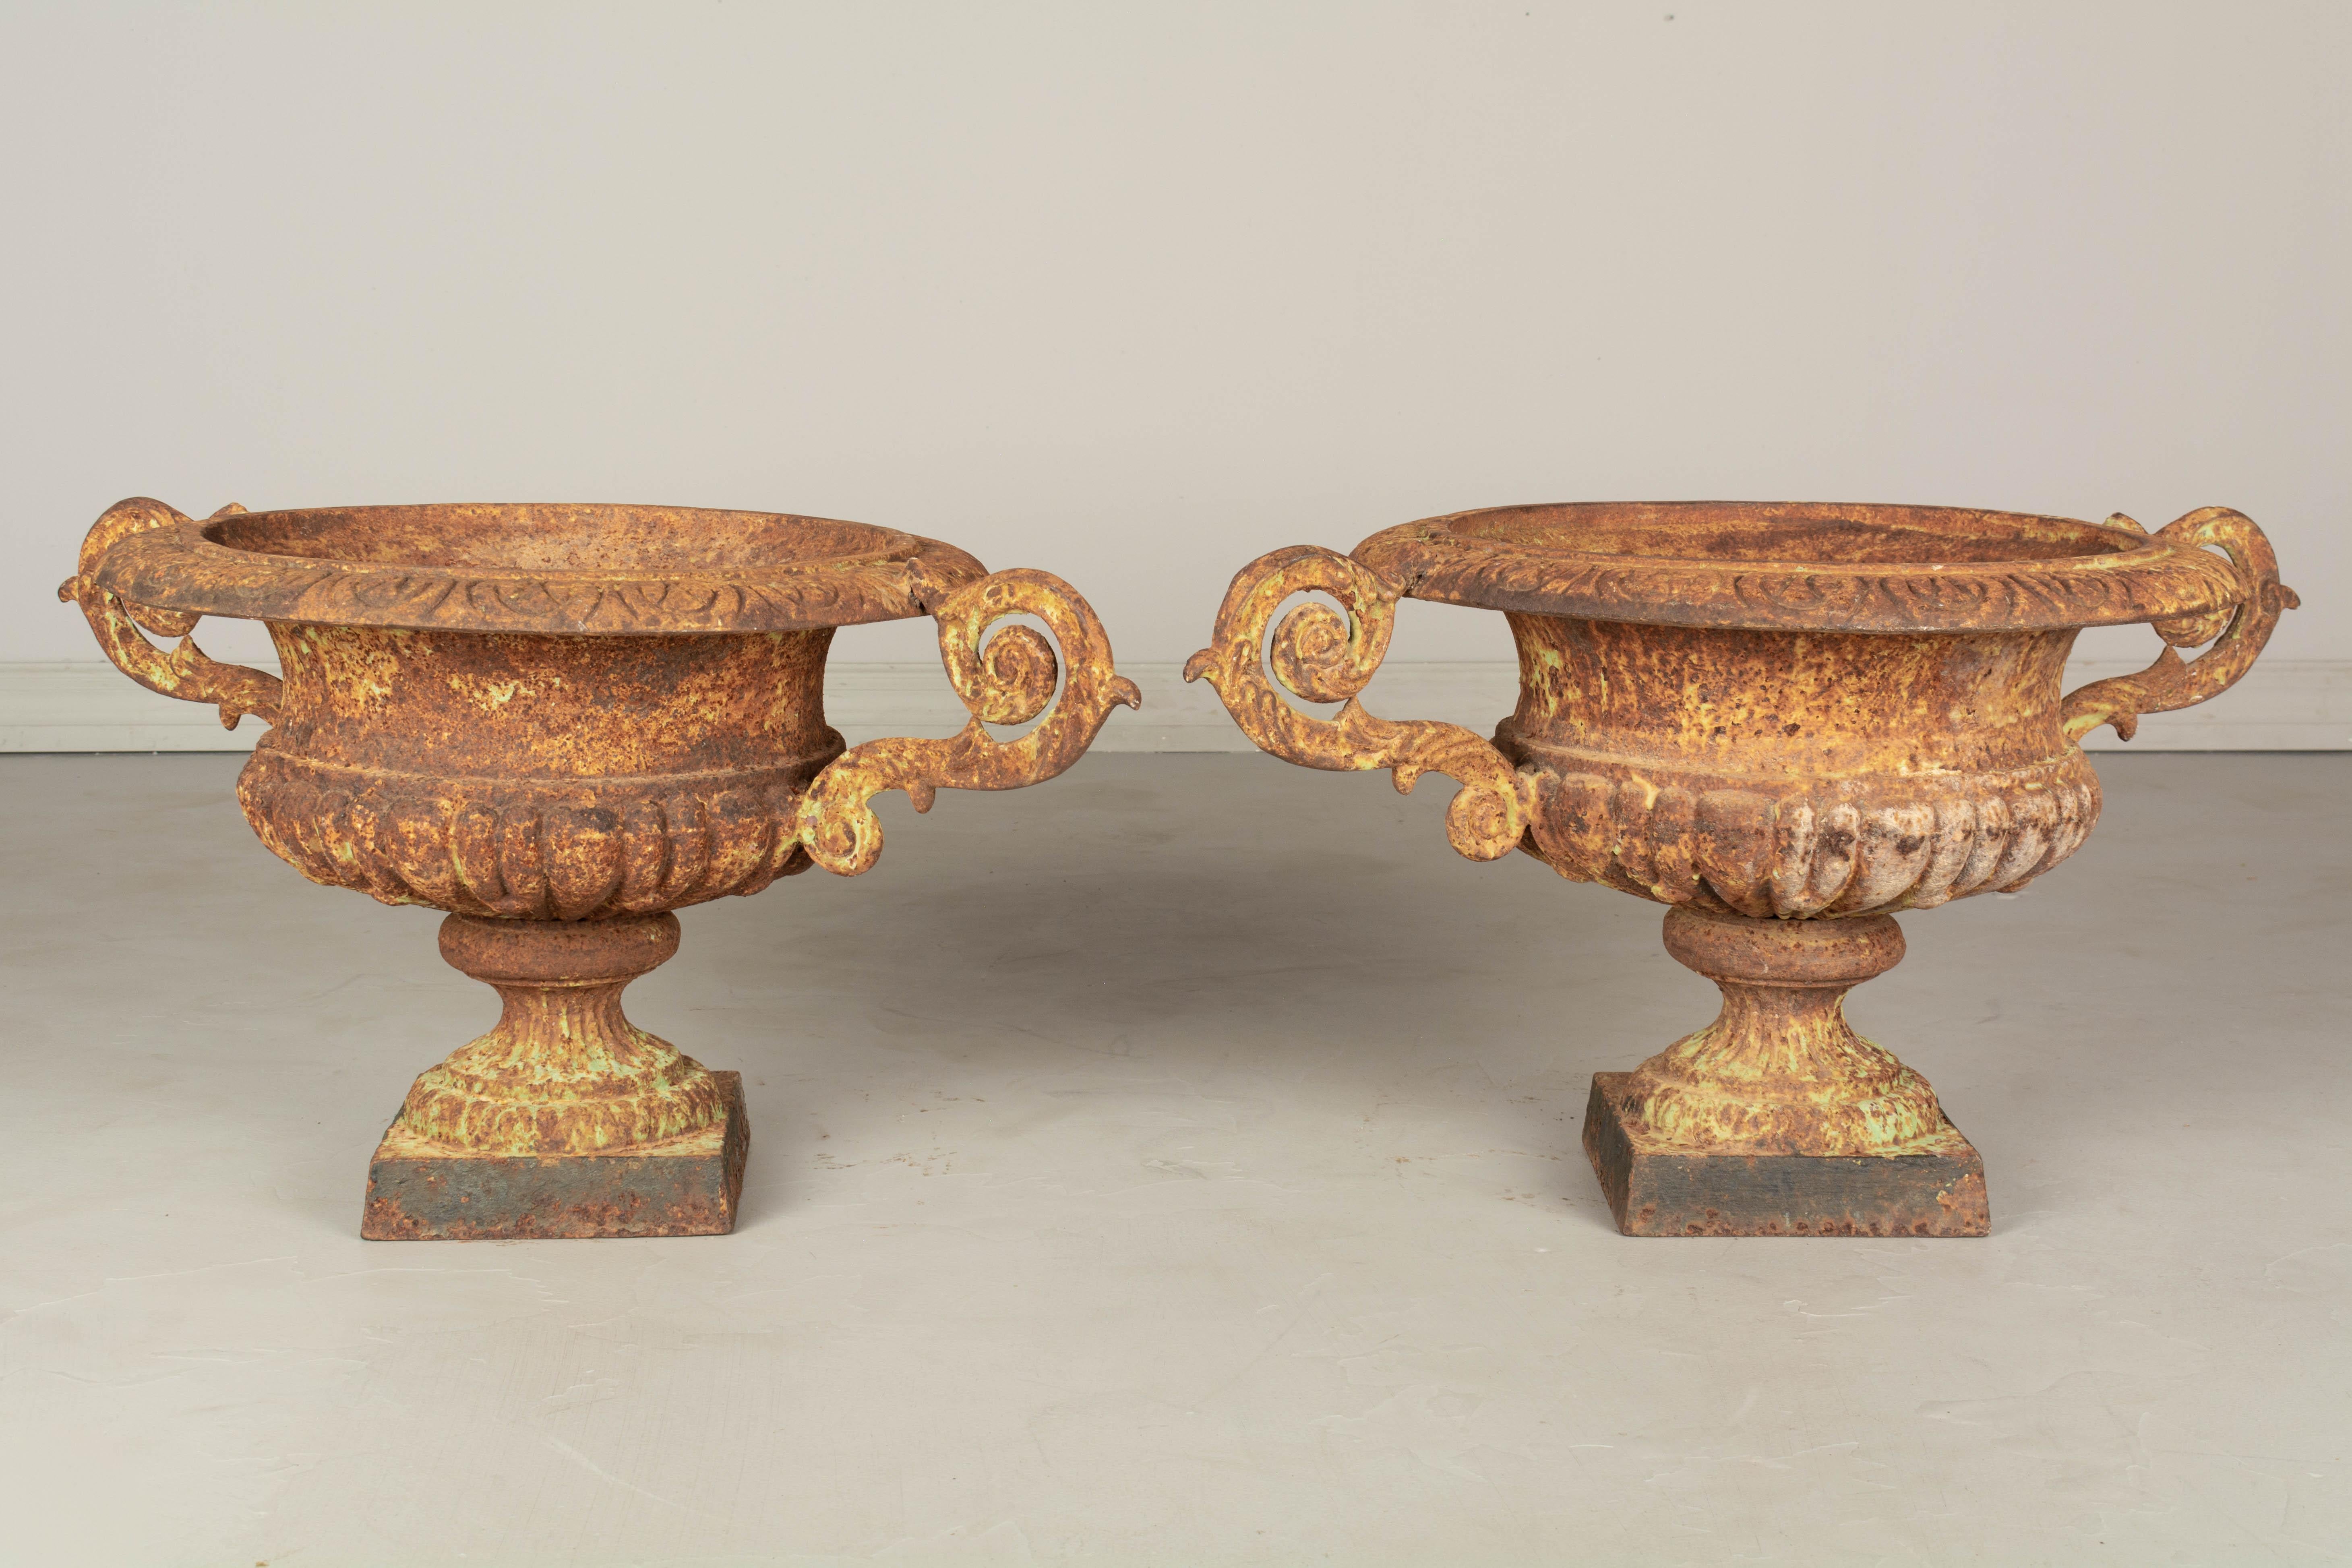 Pair of 19th Century French Cast Iron Garden Urns In Good Condition For Sale In Winter Park, FL